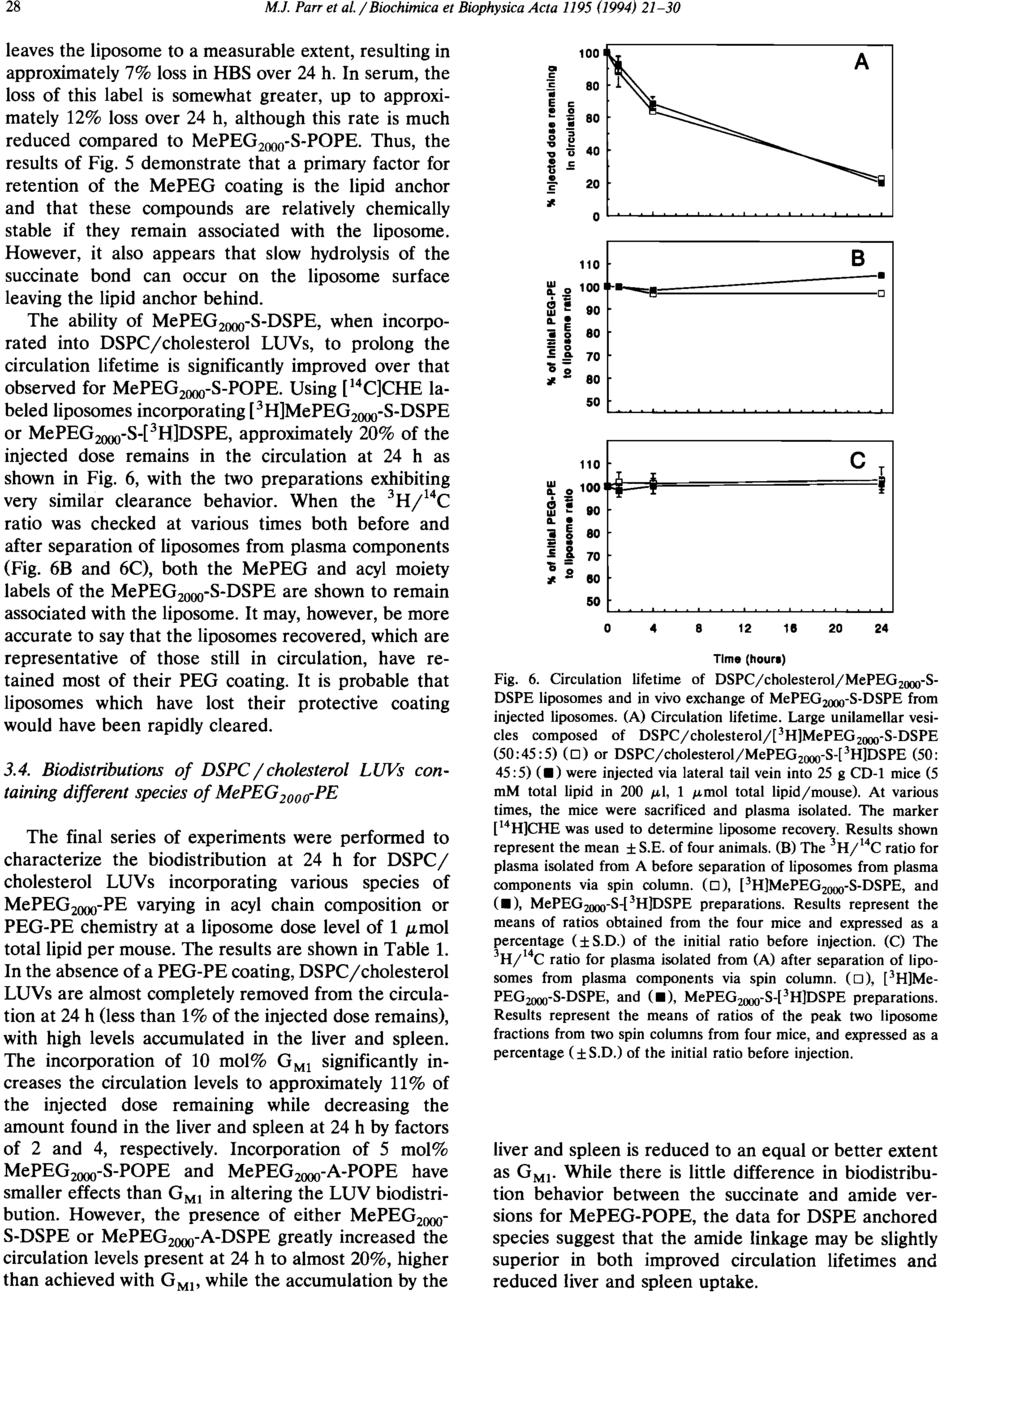 28 M.J. Parr et al. / Bichimica et Biphysica Acta 1195 (1994) 21-30 leaves the lipsme t a measurable extent, resulting in apprximately 7% lss in HBS ver 24 h.